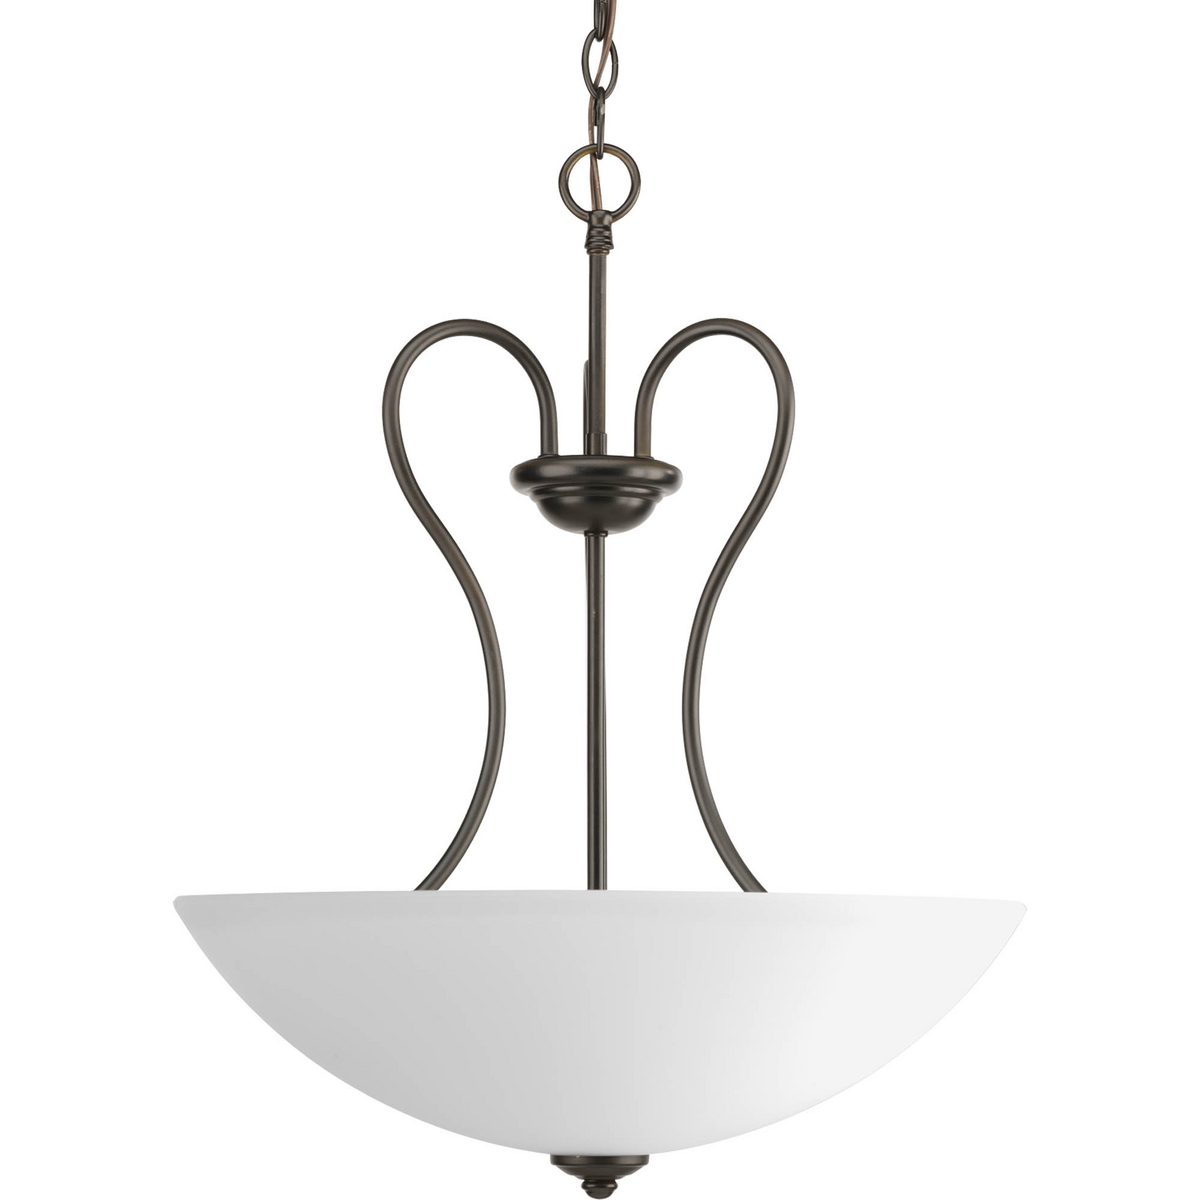 Three-light Antique Bronze inverted pendant with etched glass bowl and curvaceous arms.